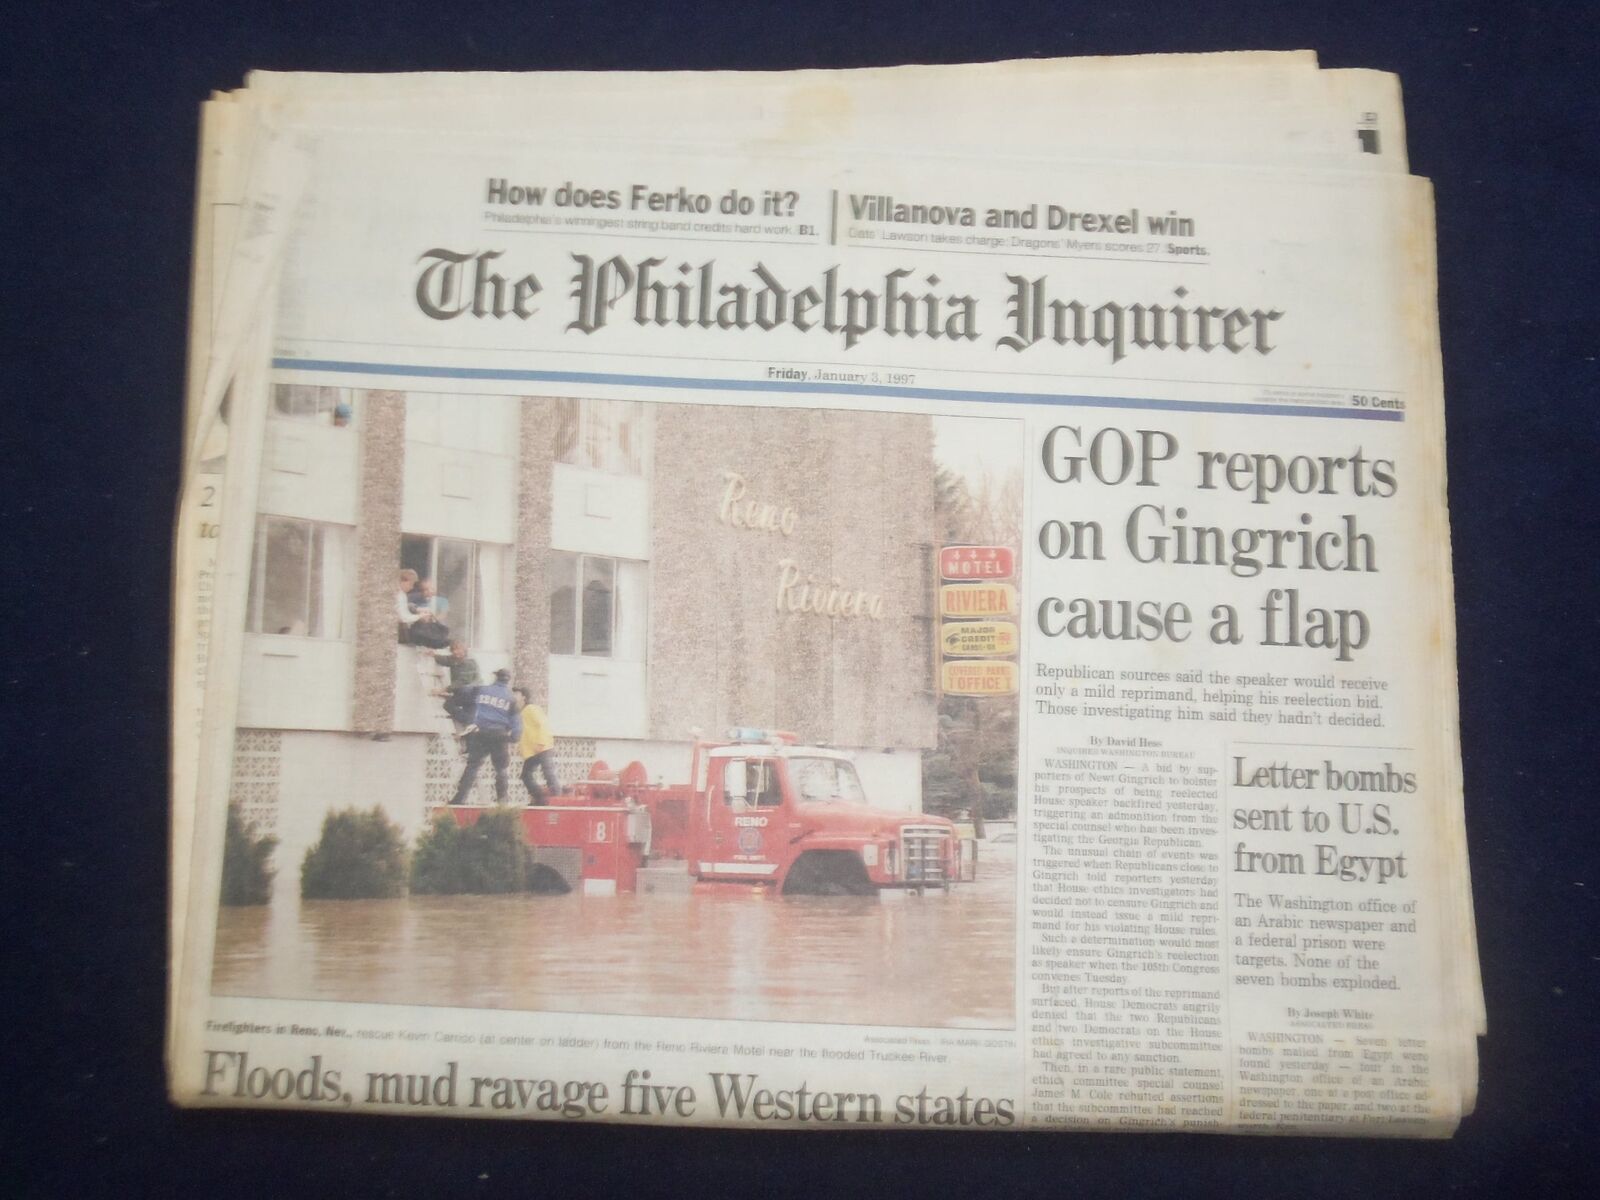 1997 JAN 3 PHILADELPHIA INQUIRER - GOP REPORTS ON GINGRICH CAUSE A FLAP- NP 7165